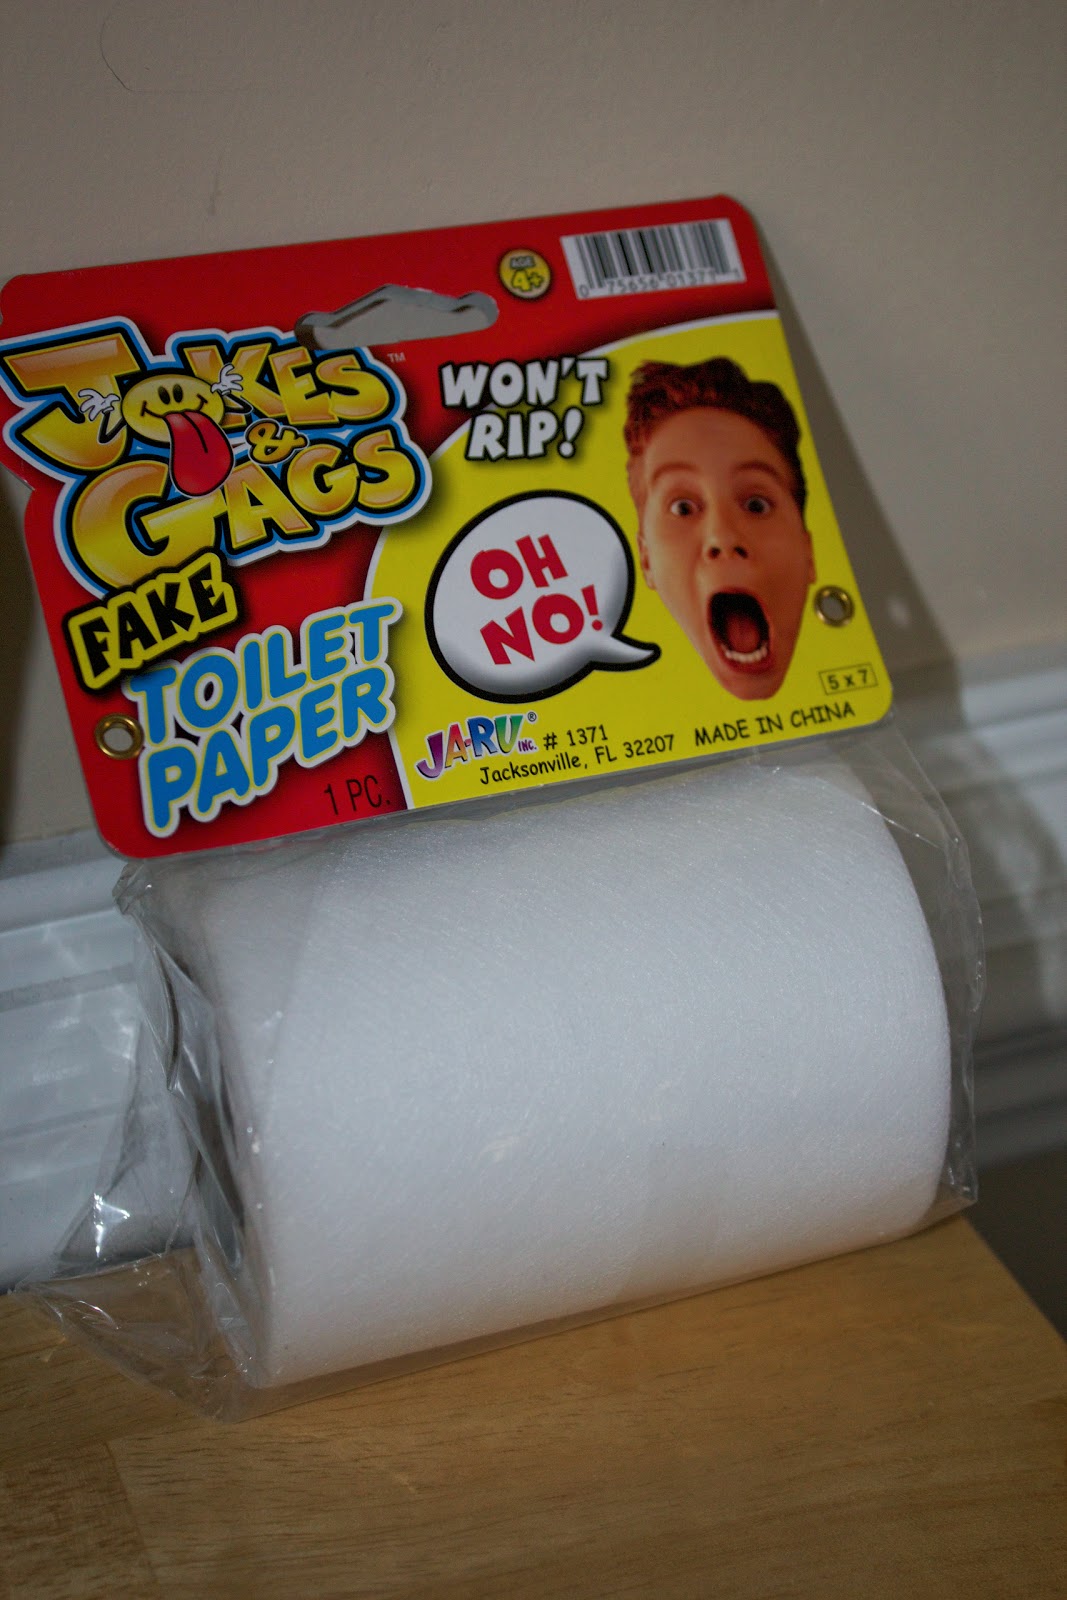 Trick toilet paper and doggy poo! Once I have a theme, I can't stop.